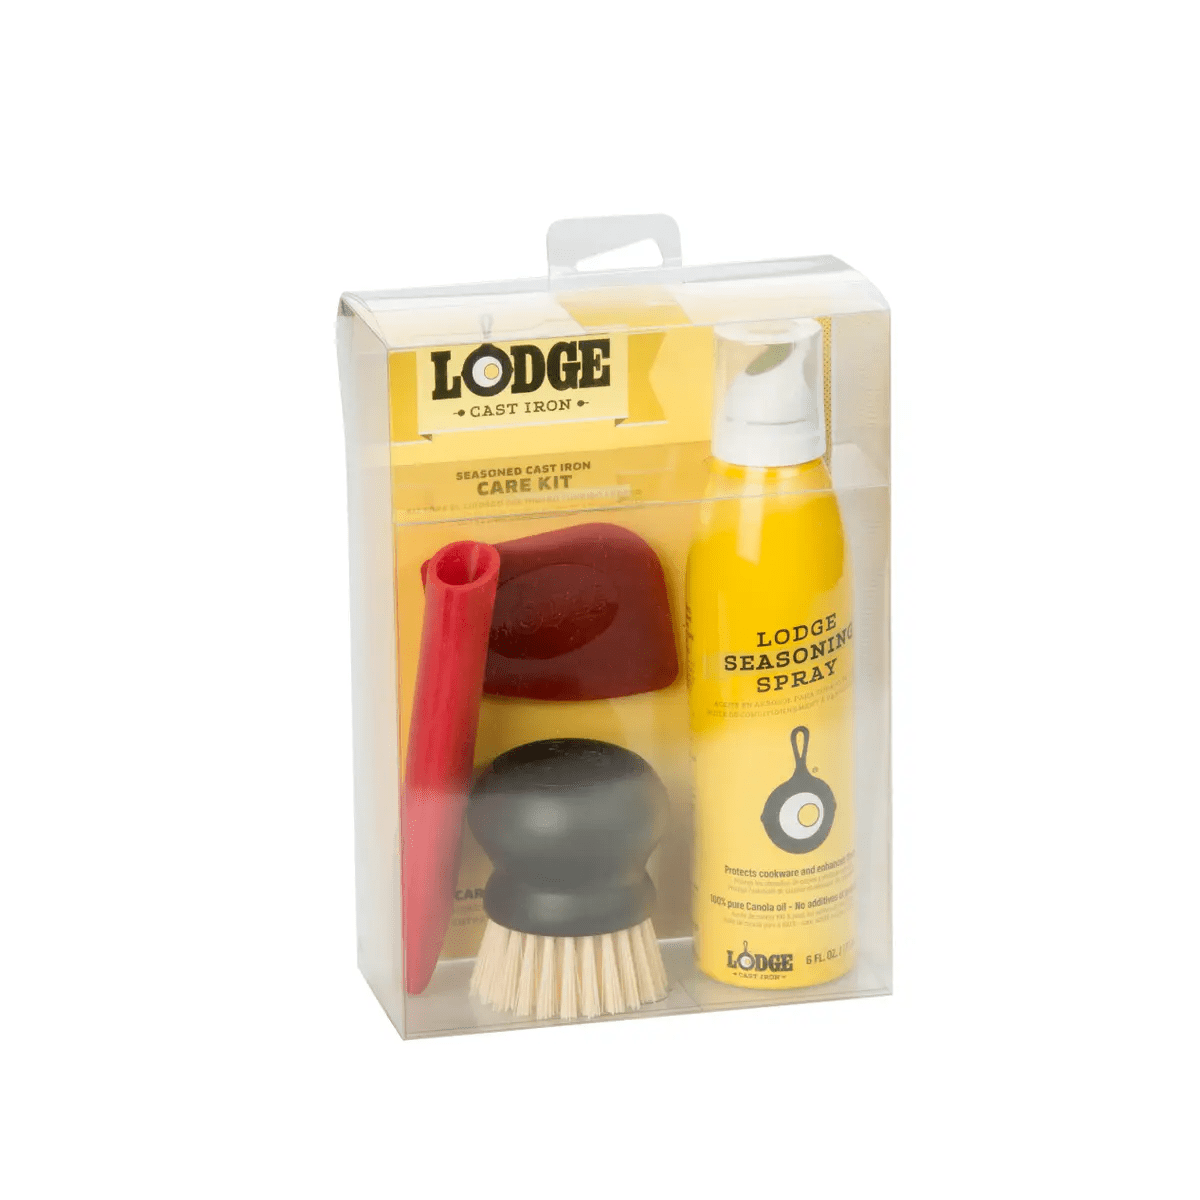 New in food: Cast iron care kit by Lodge